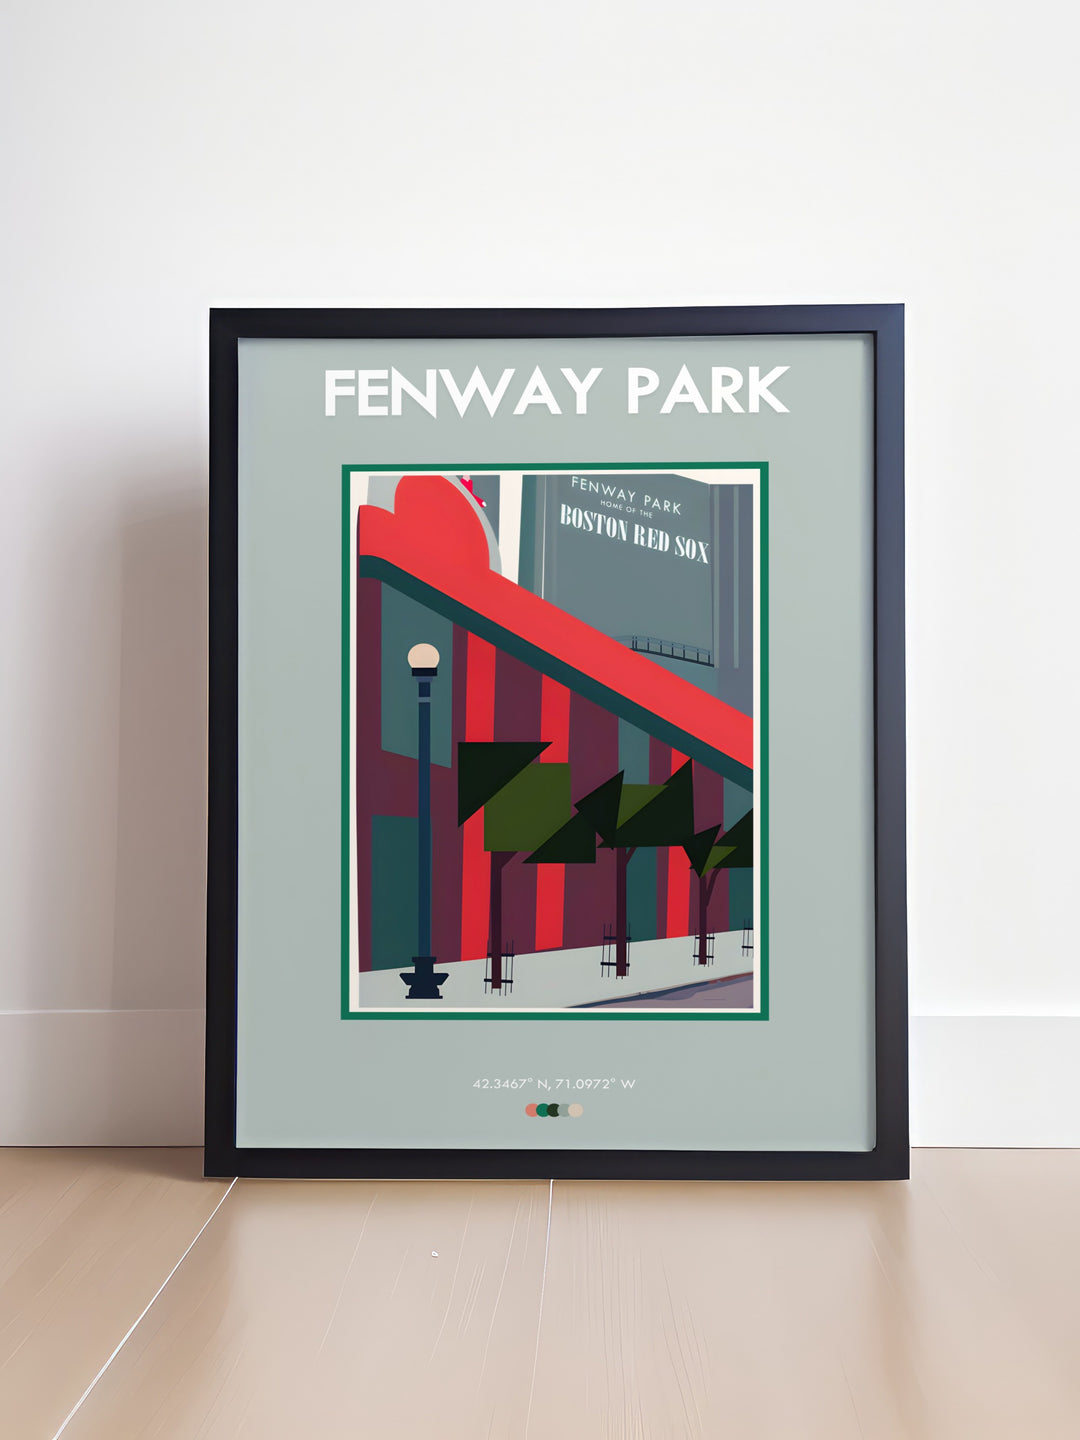 Red Sox Print capturing the energy and excitement of Fenway Park on game day a beautiful piece of art for baseball fans and a thoughtful gift idea for dads who love the Red Sox and the rich history of the team.